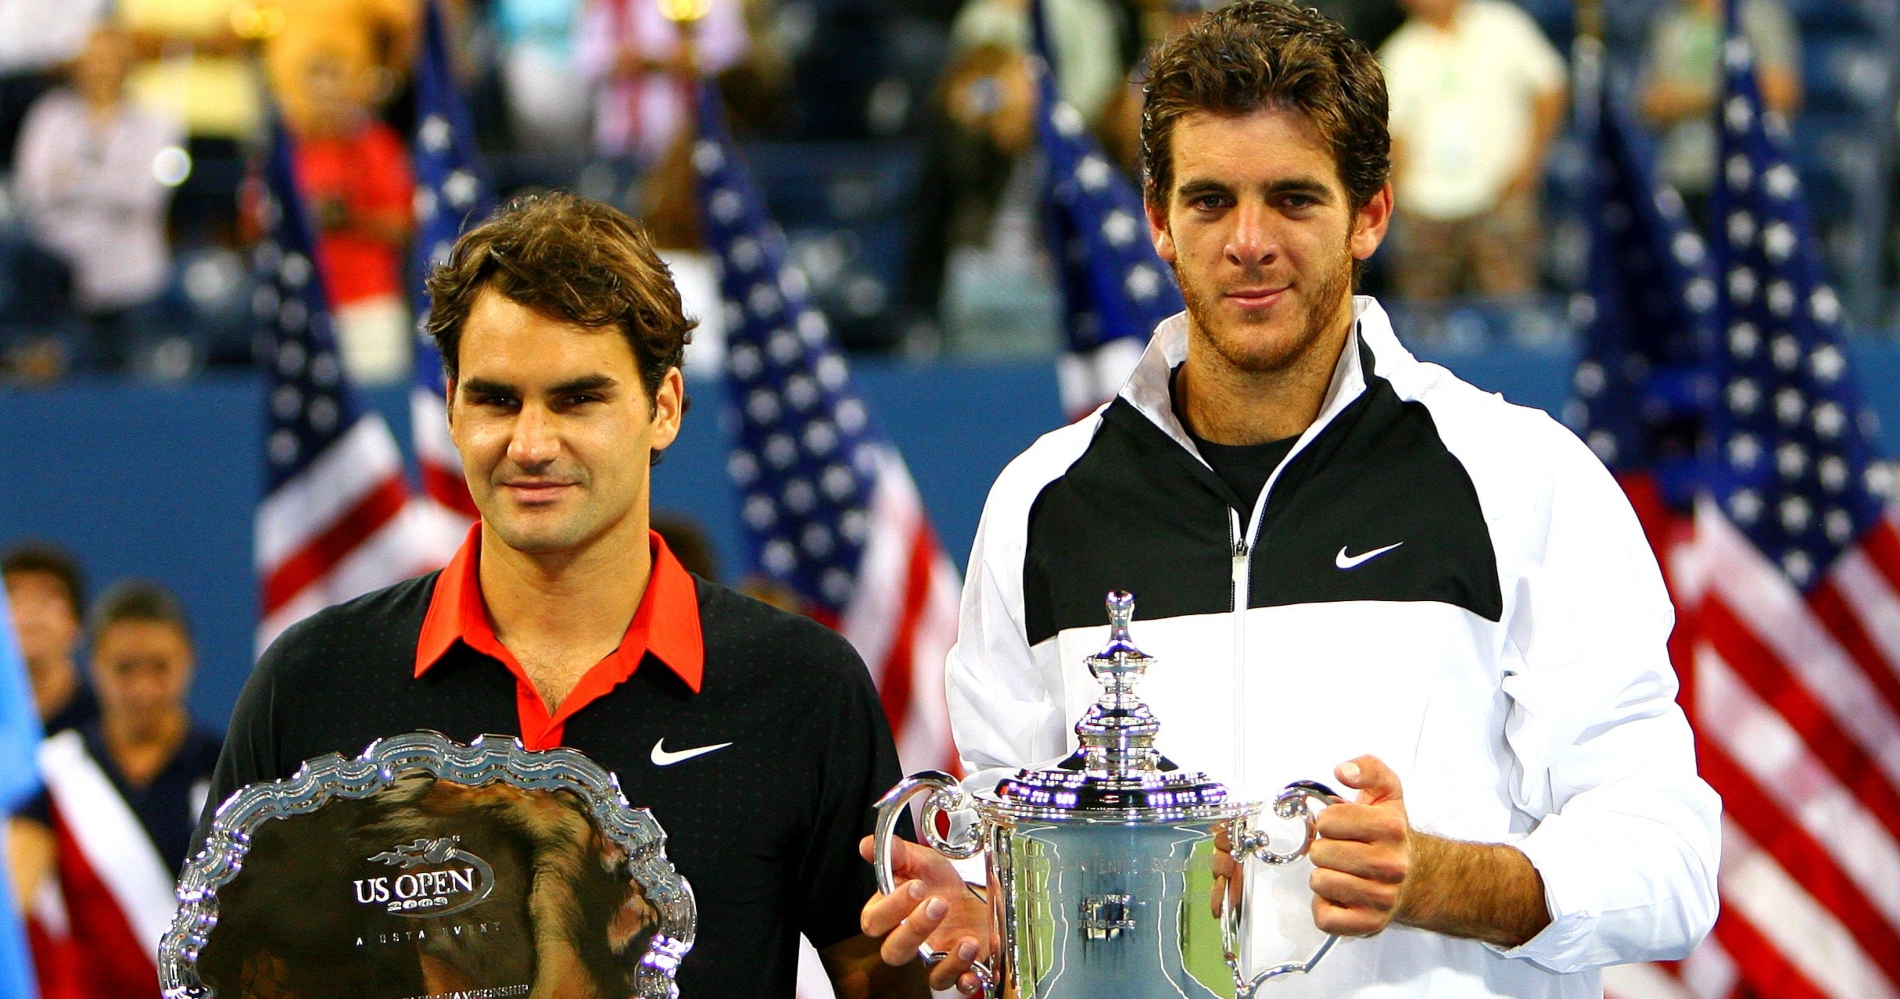 Juan Martin Del Potro and Roger Federer after their 2009 US Open final